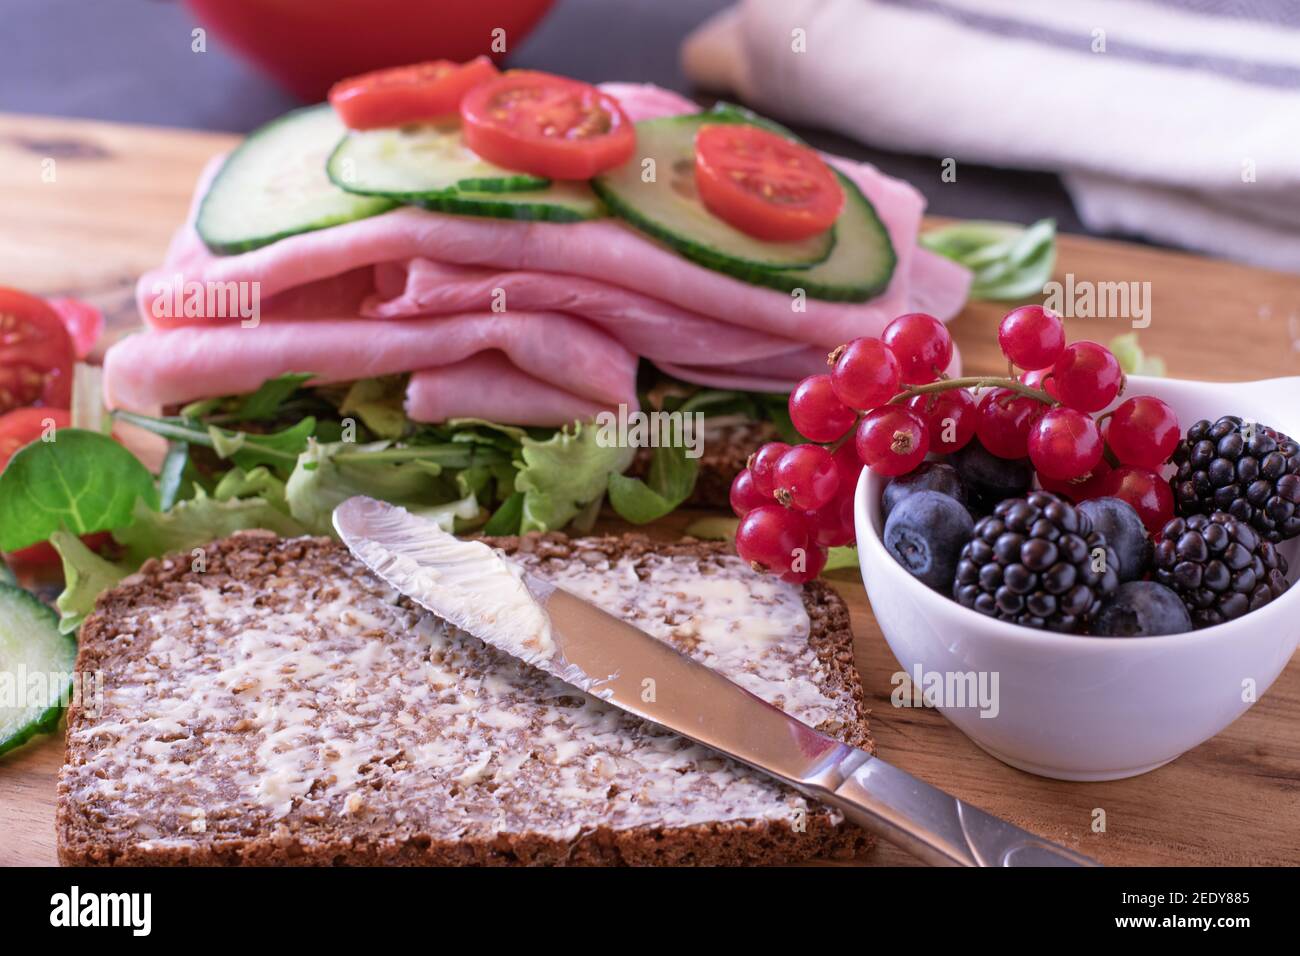 Post Workout meal with delicious sandwich, vegetables and berries Stock Photo